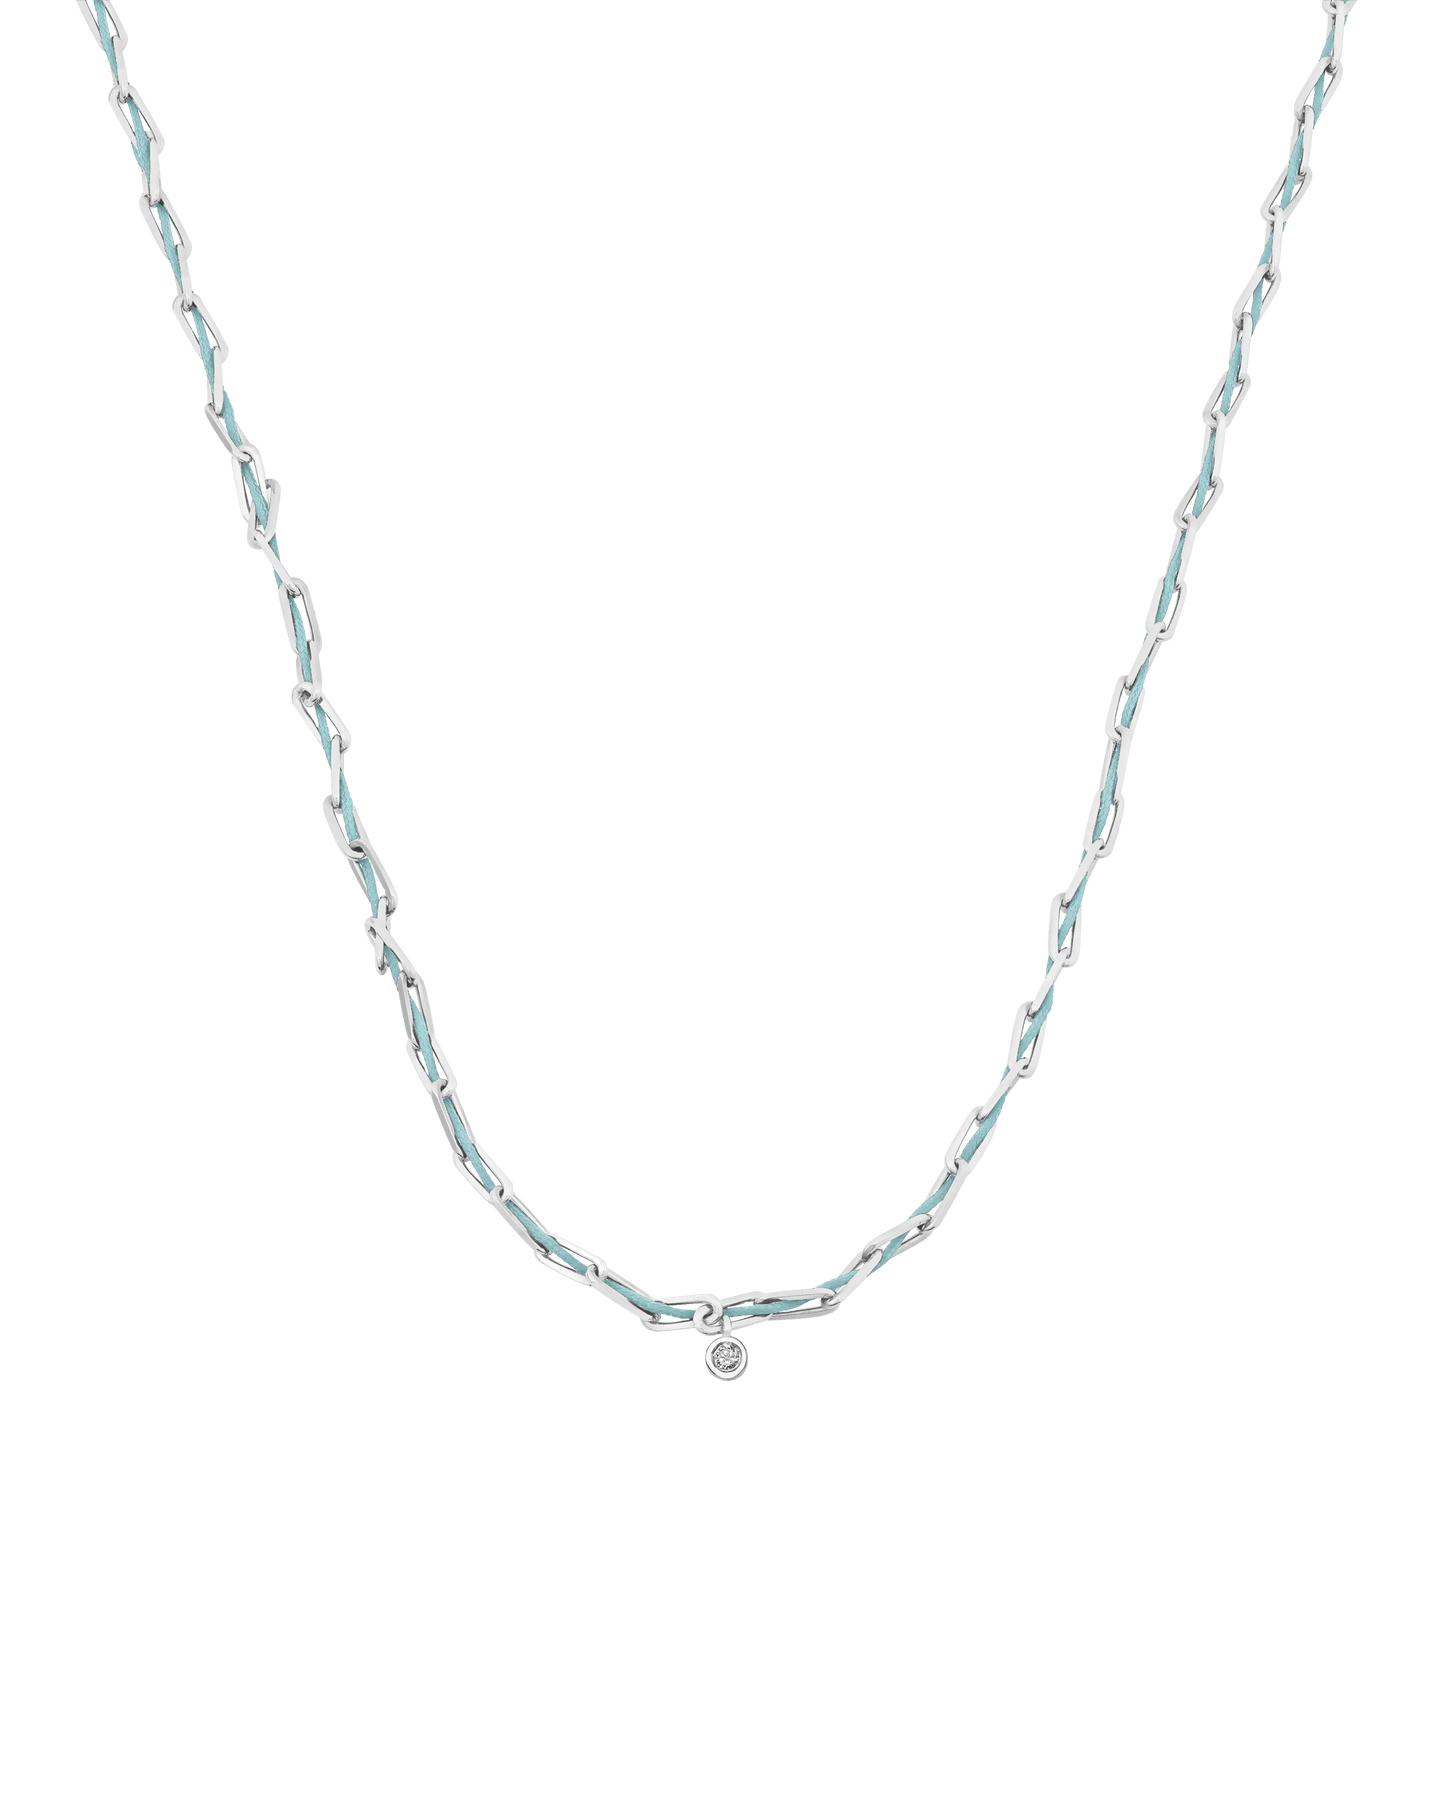 Twine Diamond Necklace - 925 Sterling Silver Necklaces magal-dev Turquoise Medium: 0.05ct 16"